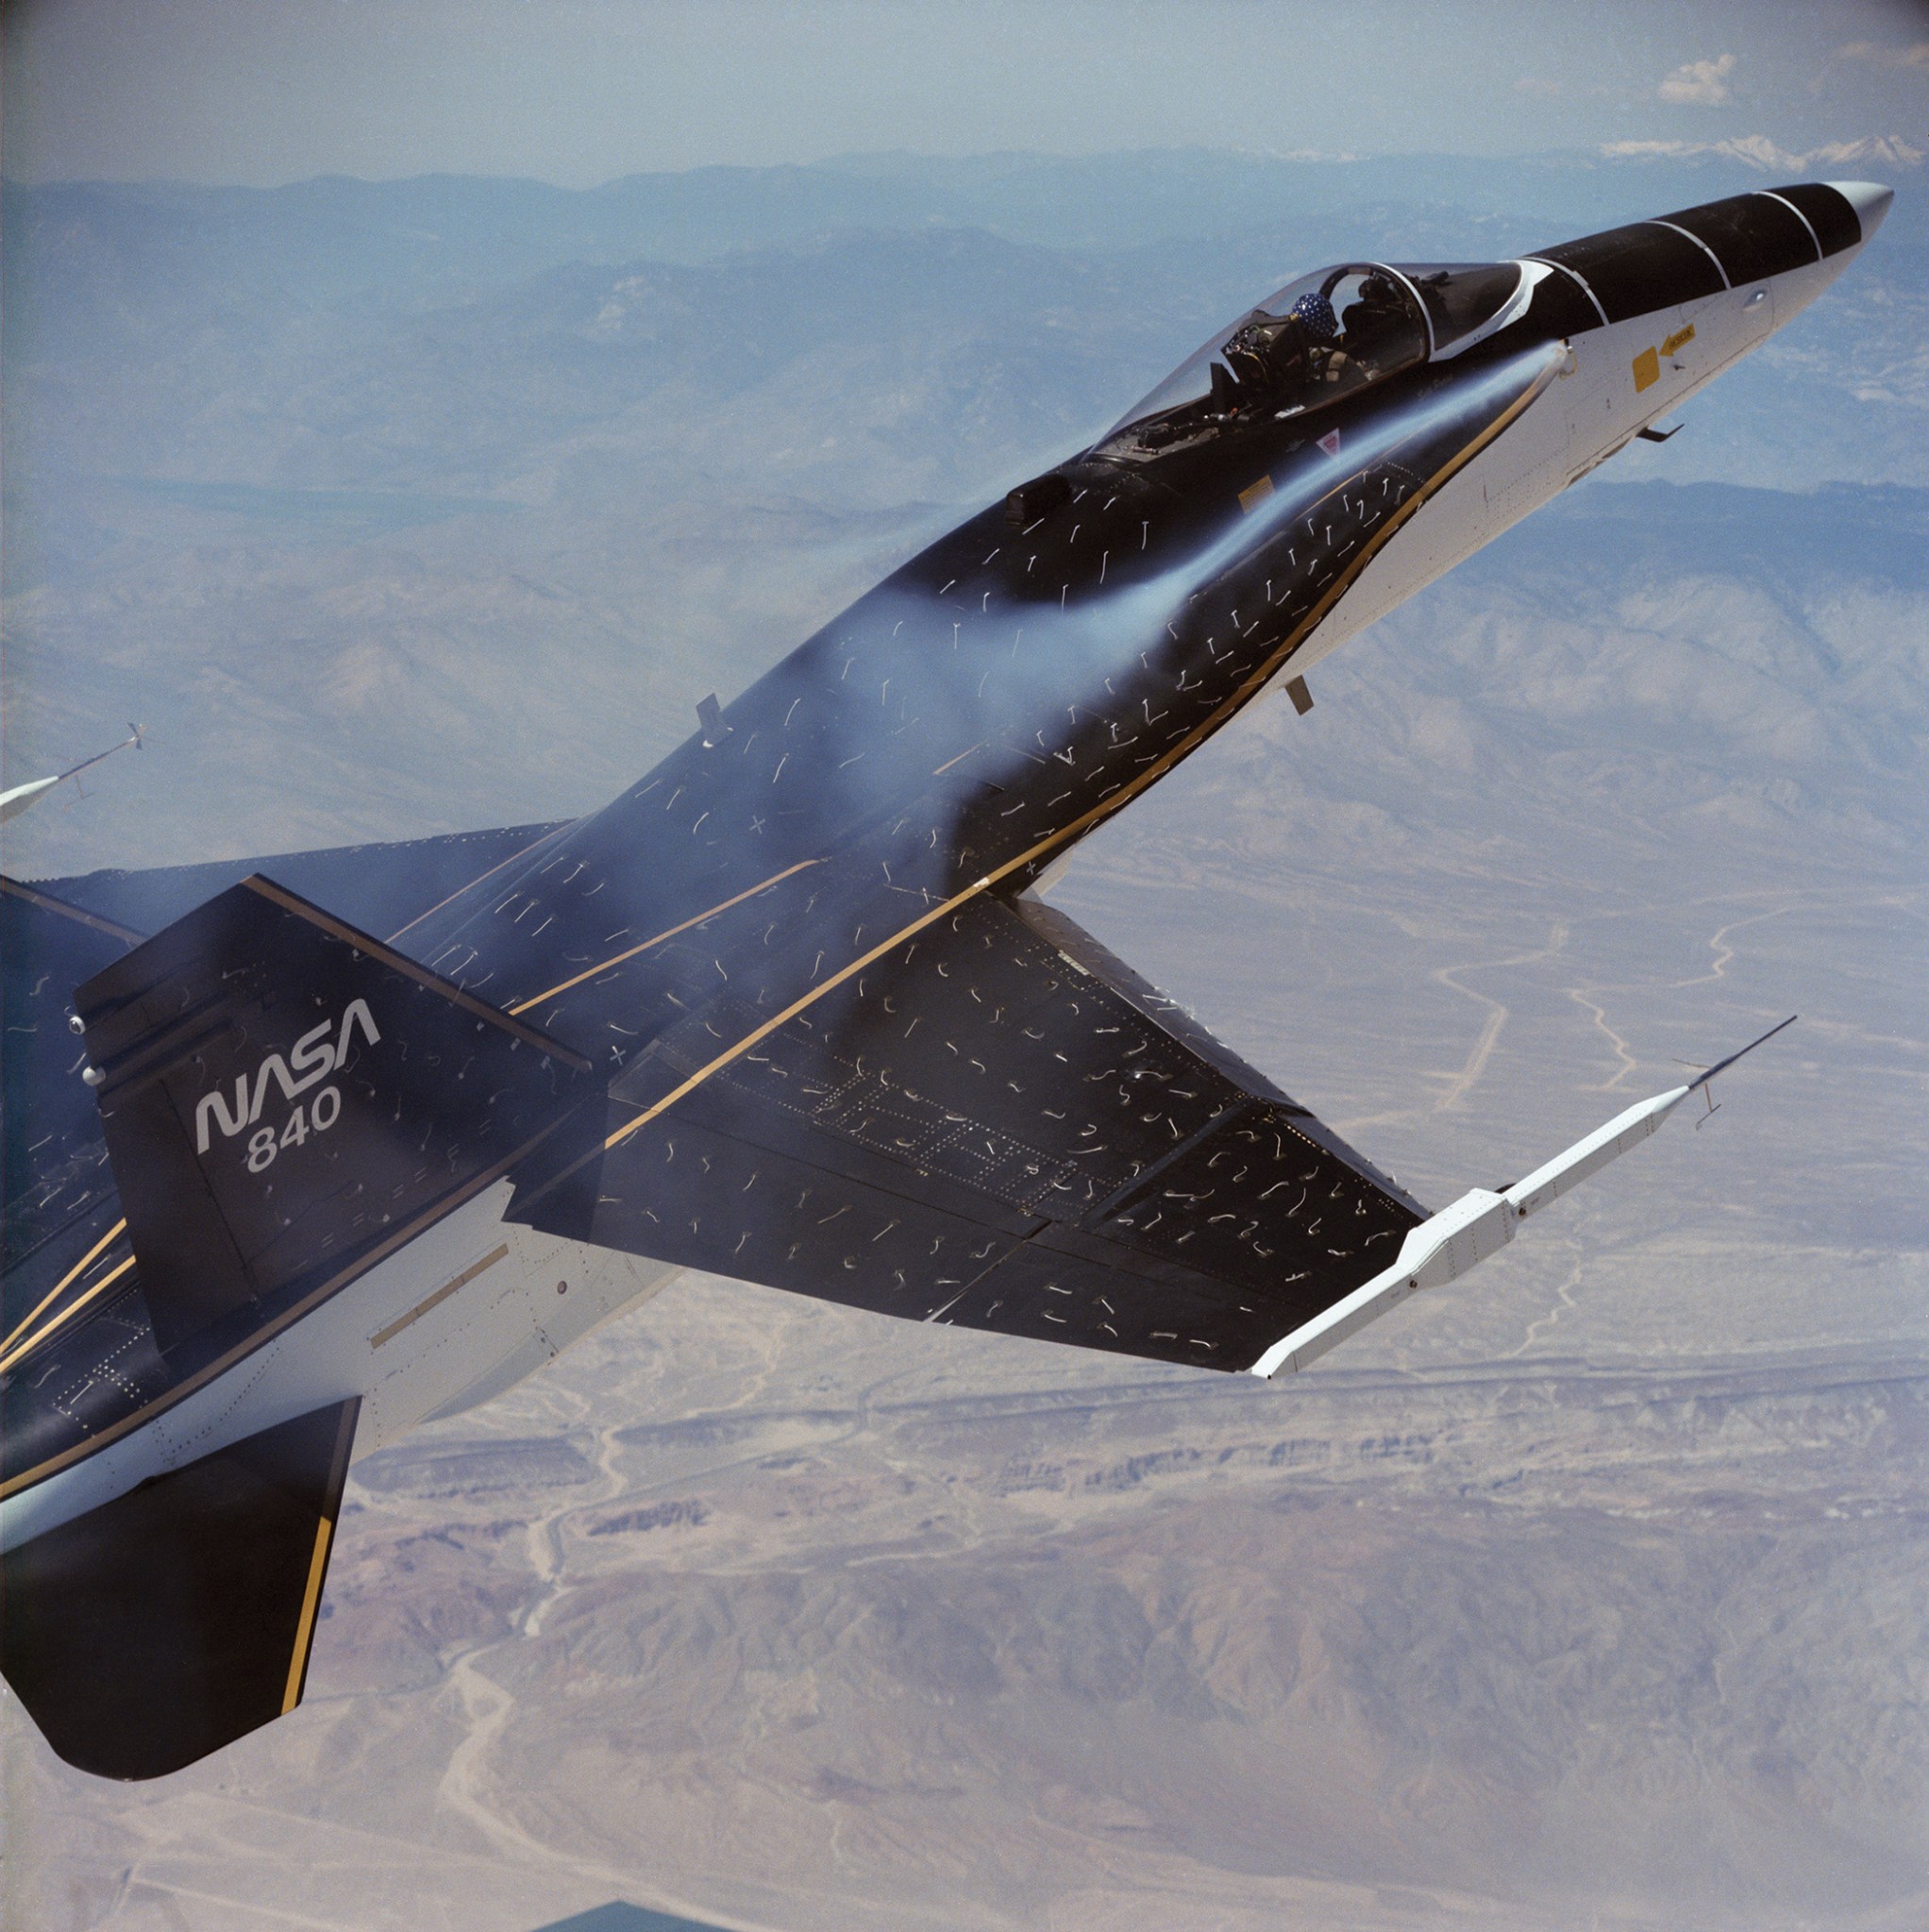 NASA Armstrong (then Dryden) researchers used smoke generators and yarn tufts for flow visualization studies on an F/A-18 as part of the High Alpha Research Vehicle (HARV) project.